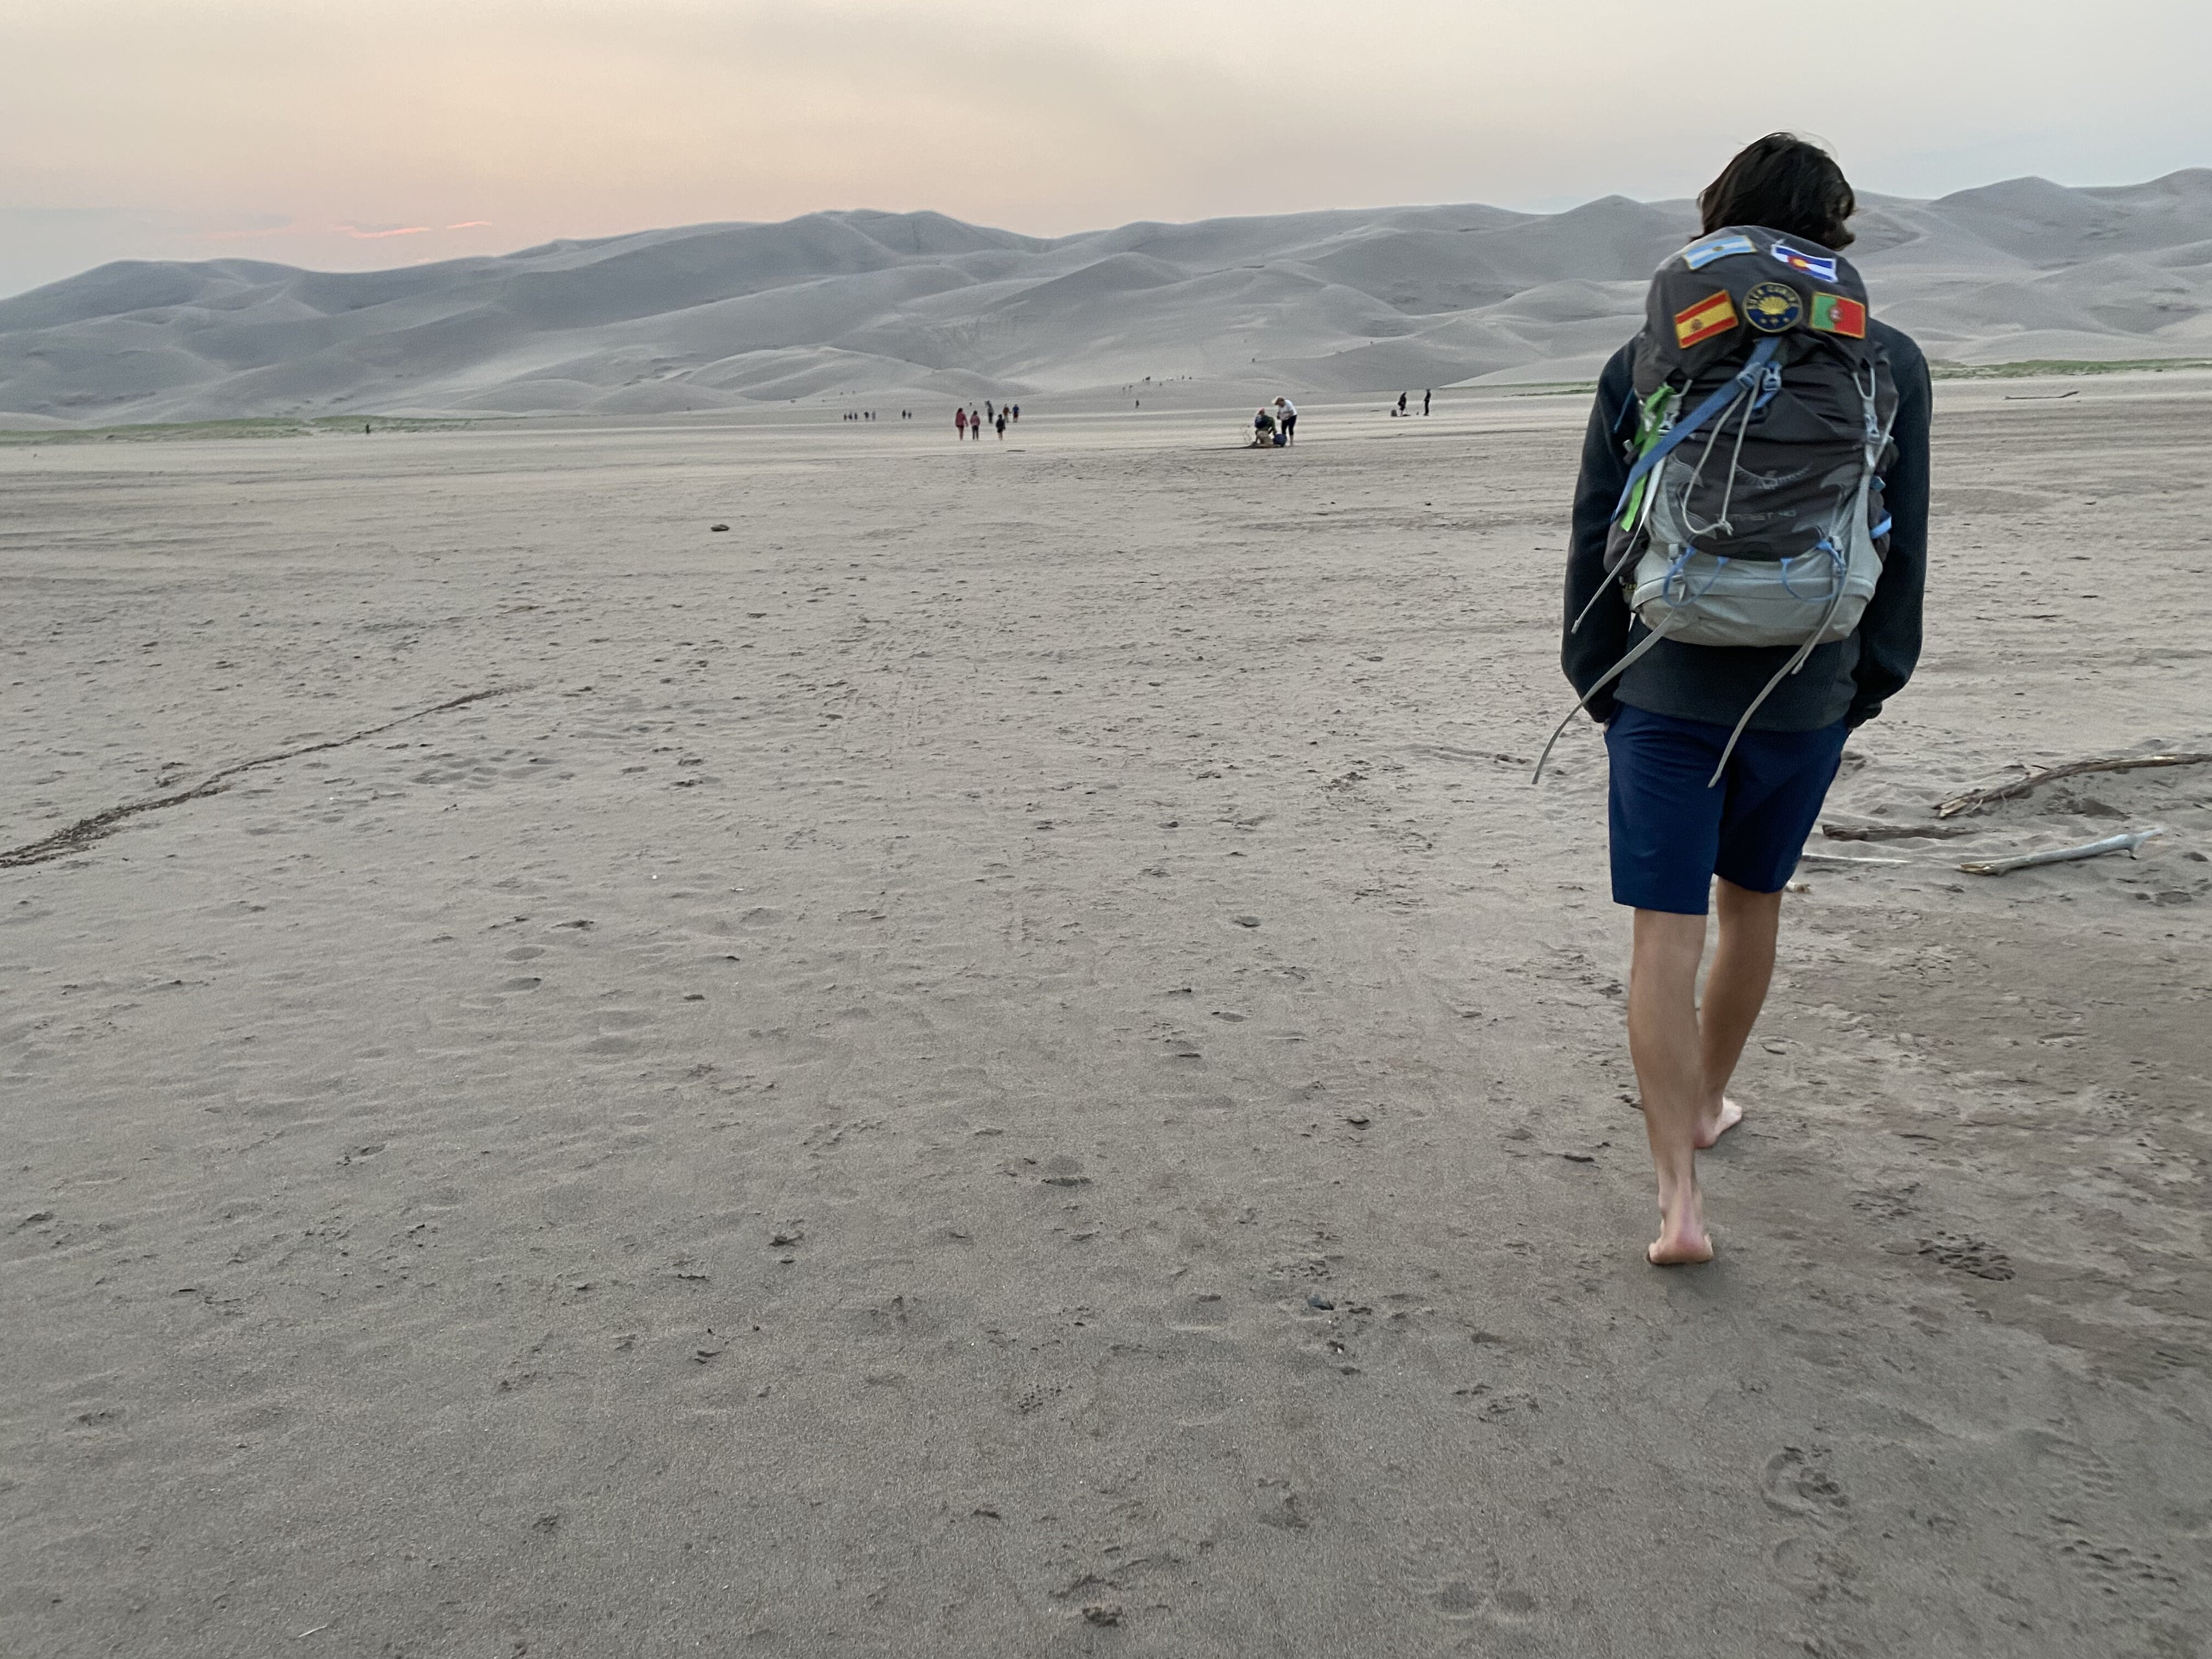 Changemaker students explore the Great Sand Dunes National Park and Preserve